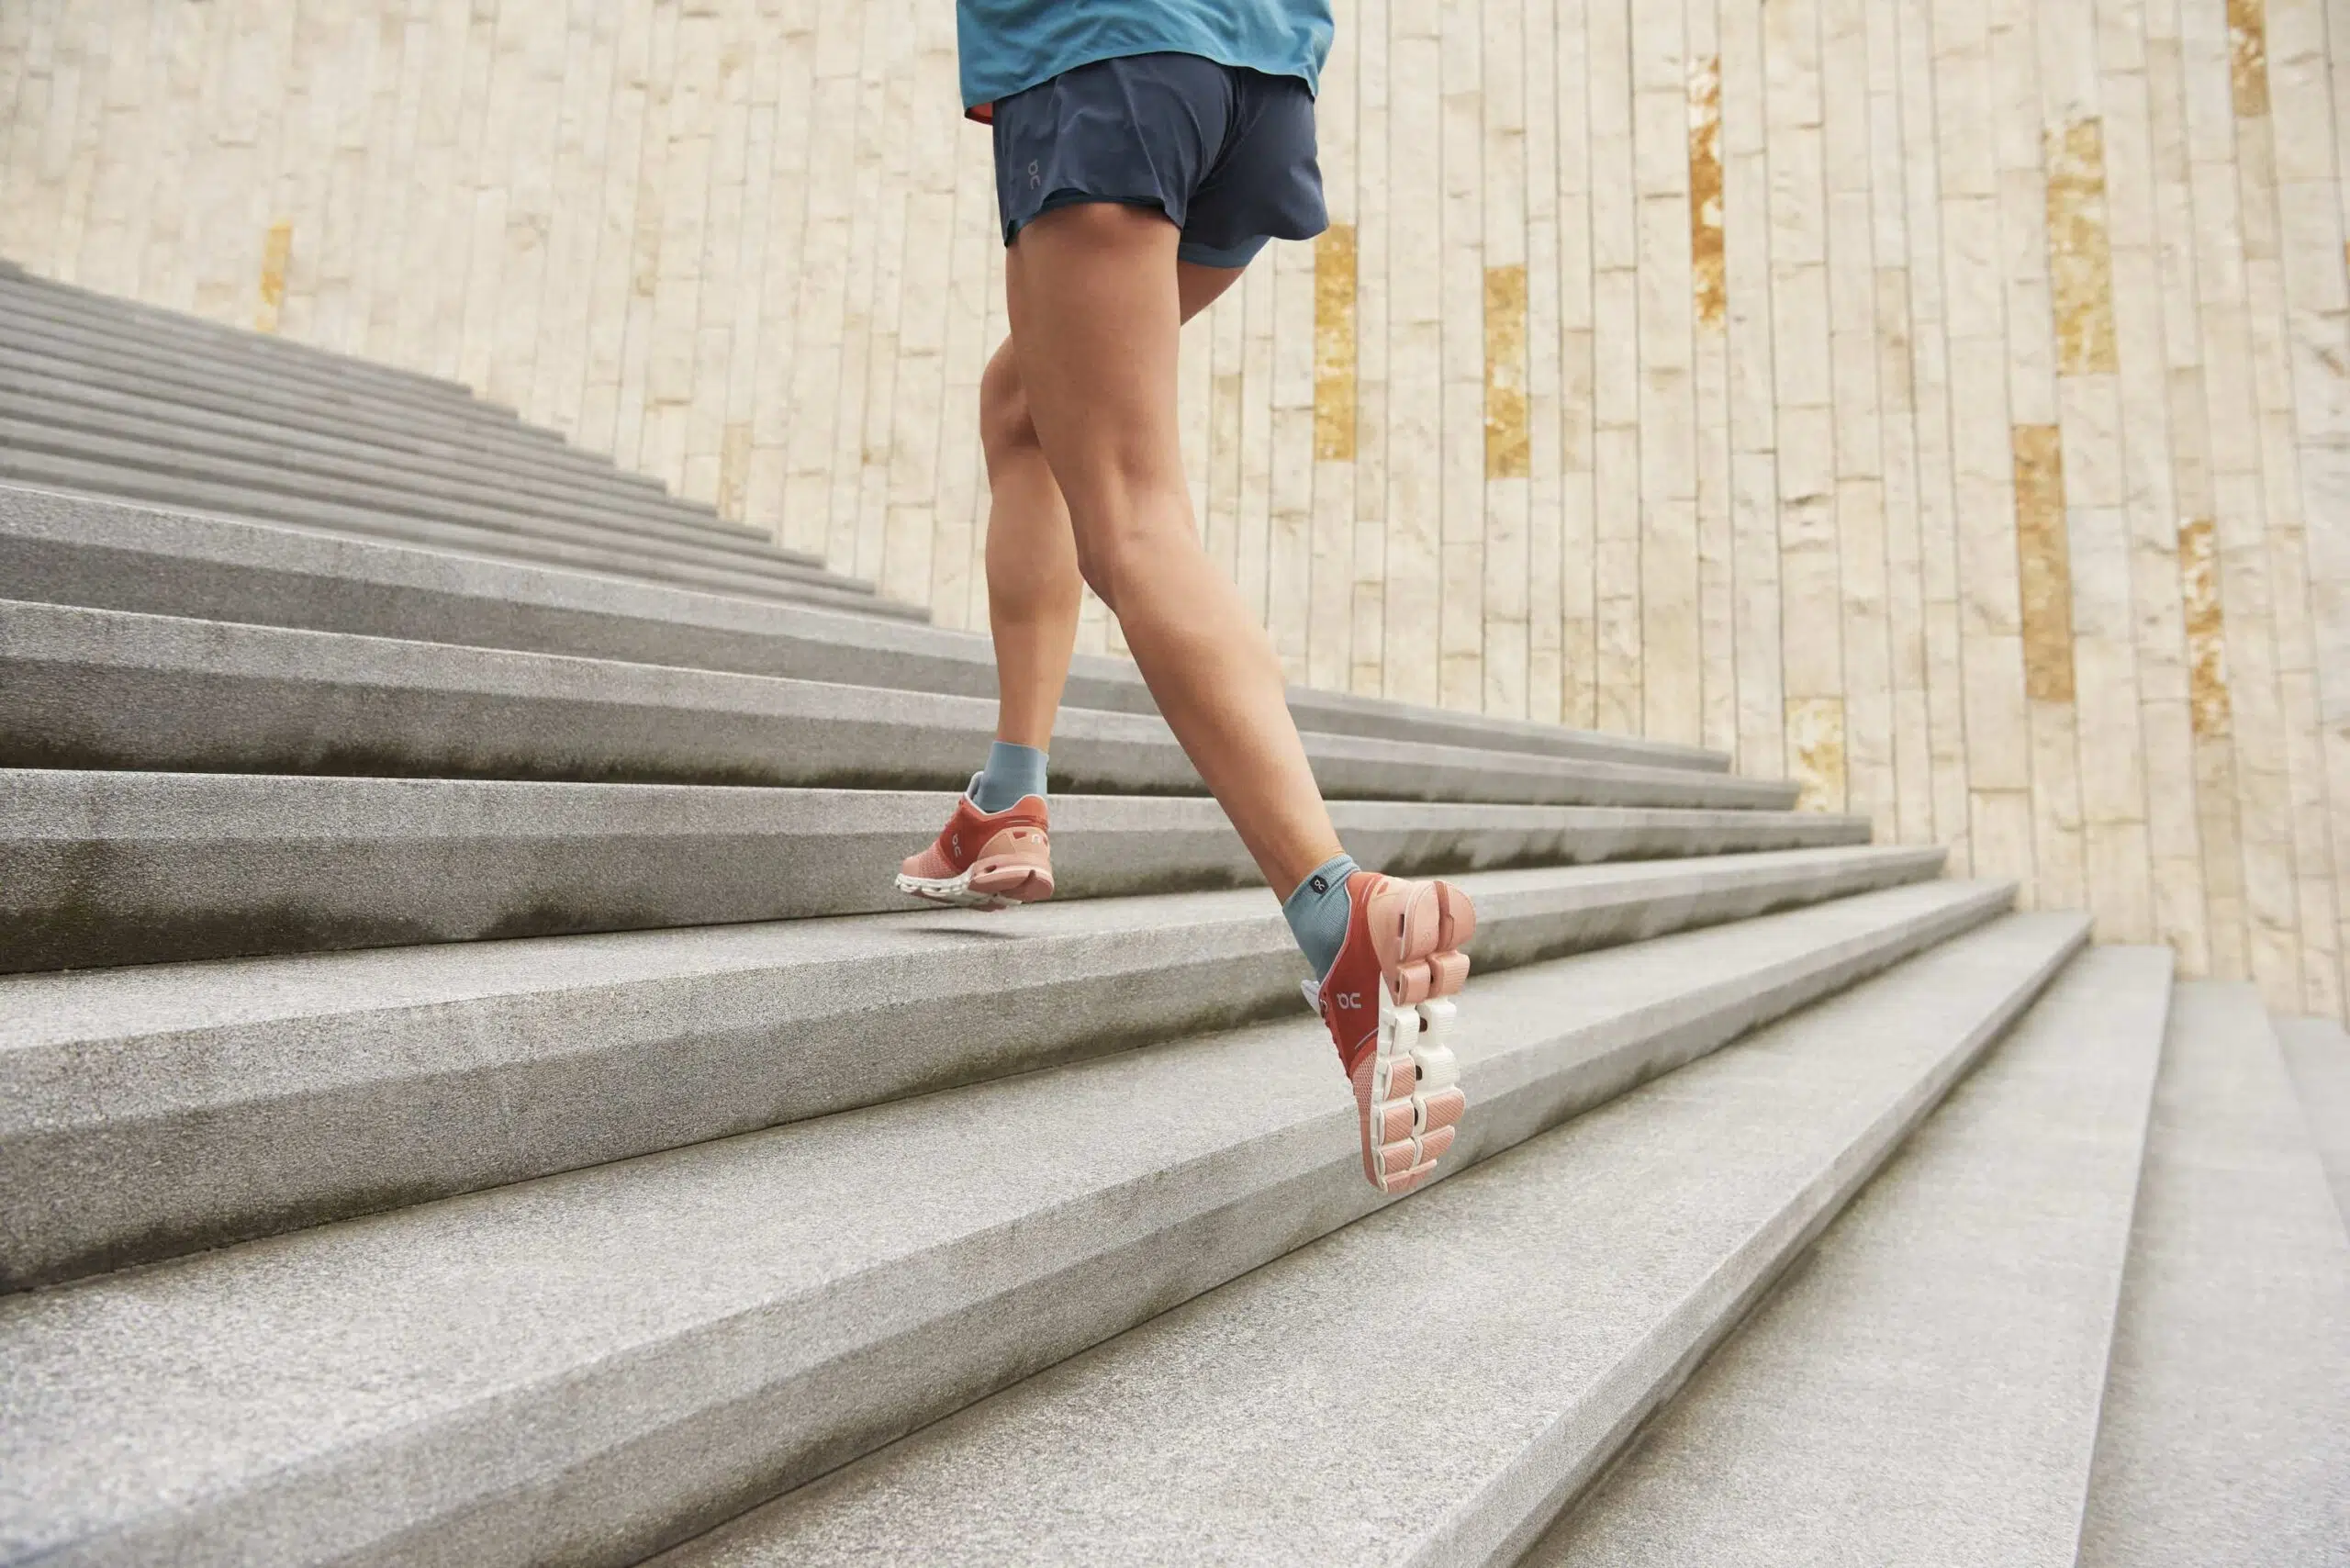 Athlete in on running shoes runs up steps scaled